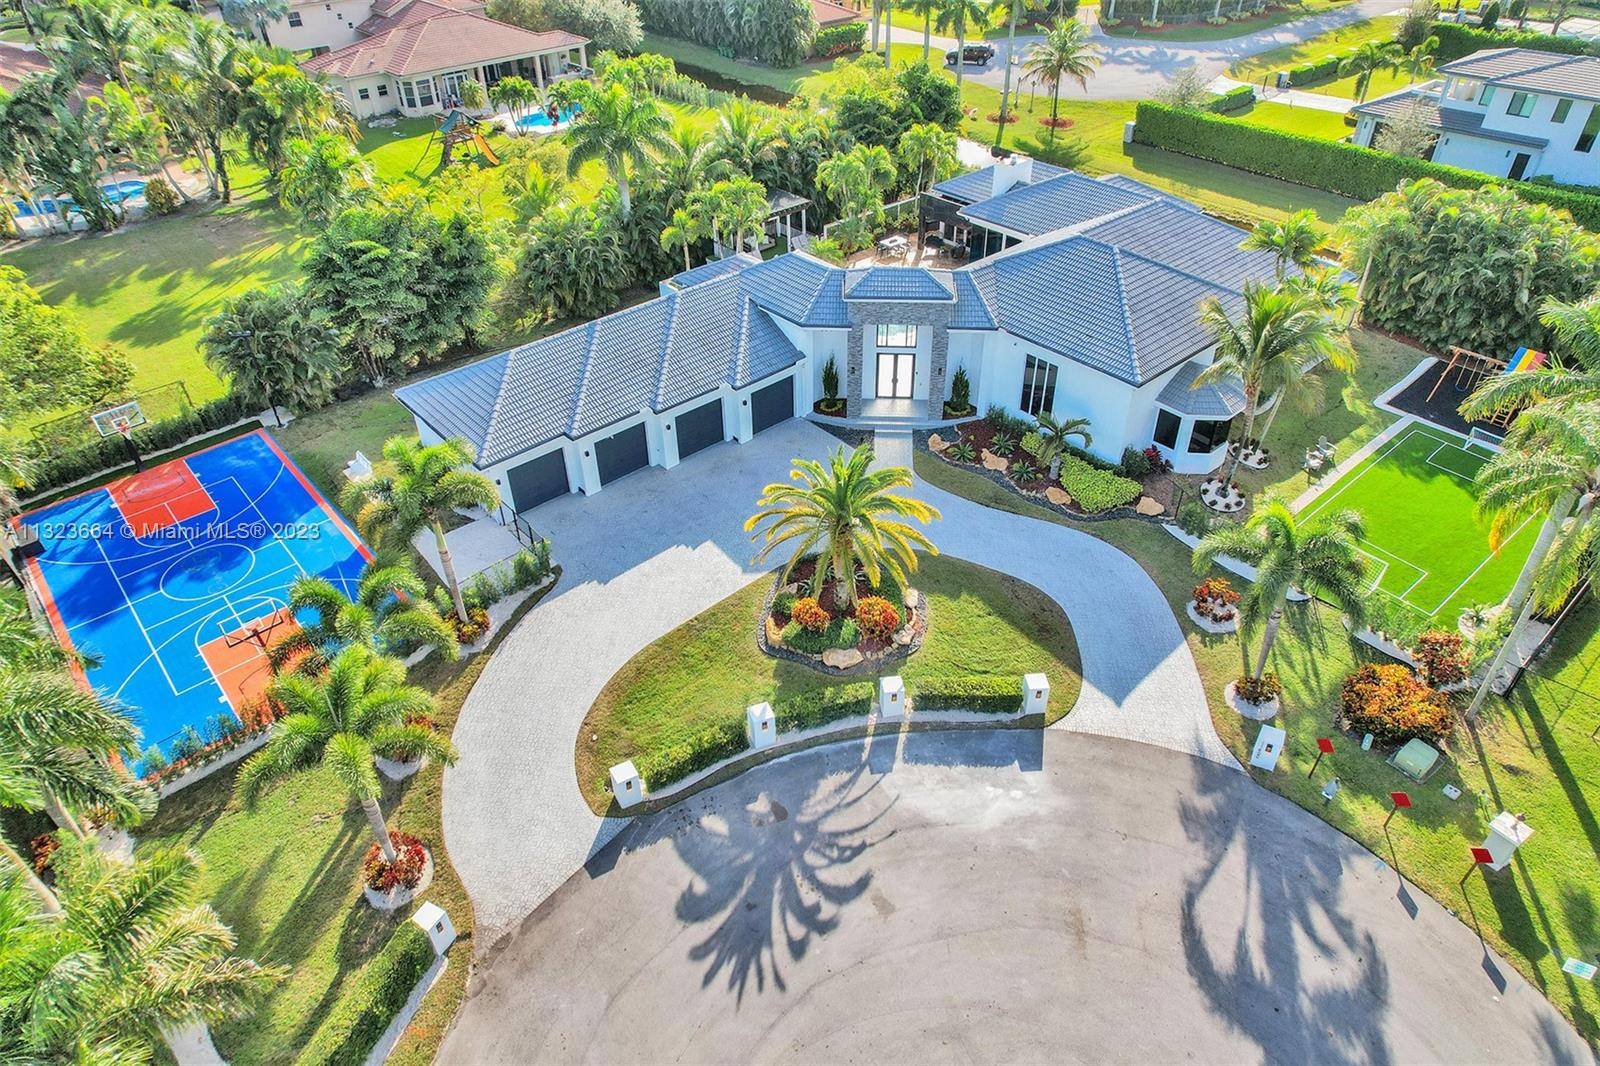 This beautiful spacious luxury estate featuring 9 bedrooms and 5 baths is the perfect reunion getaway for families and groups.